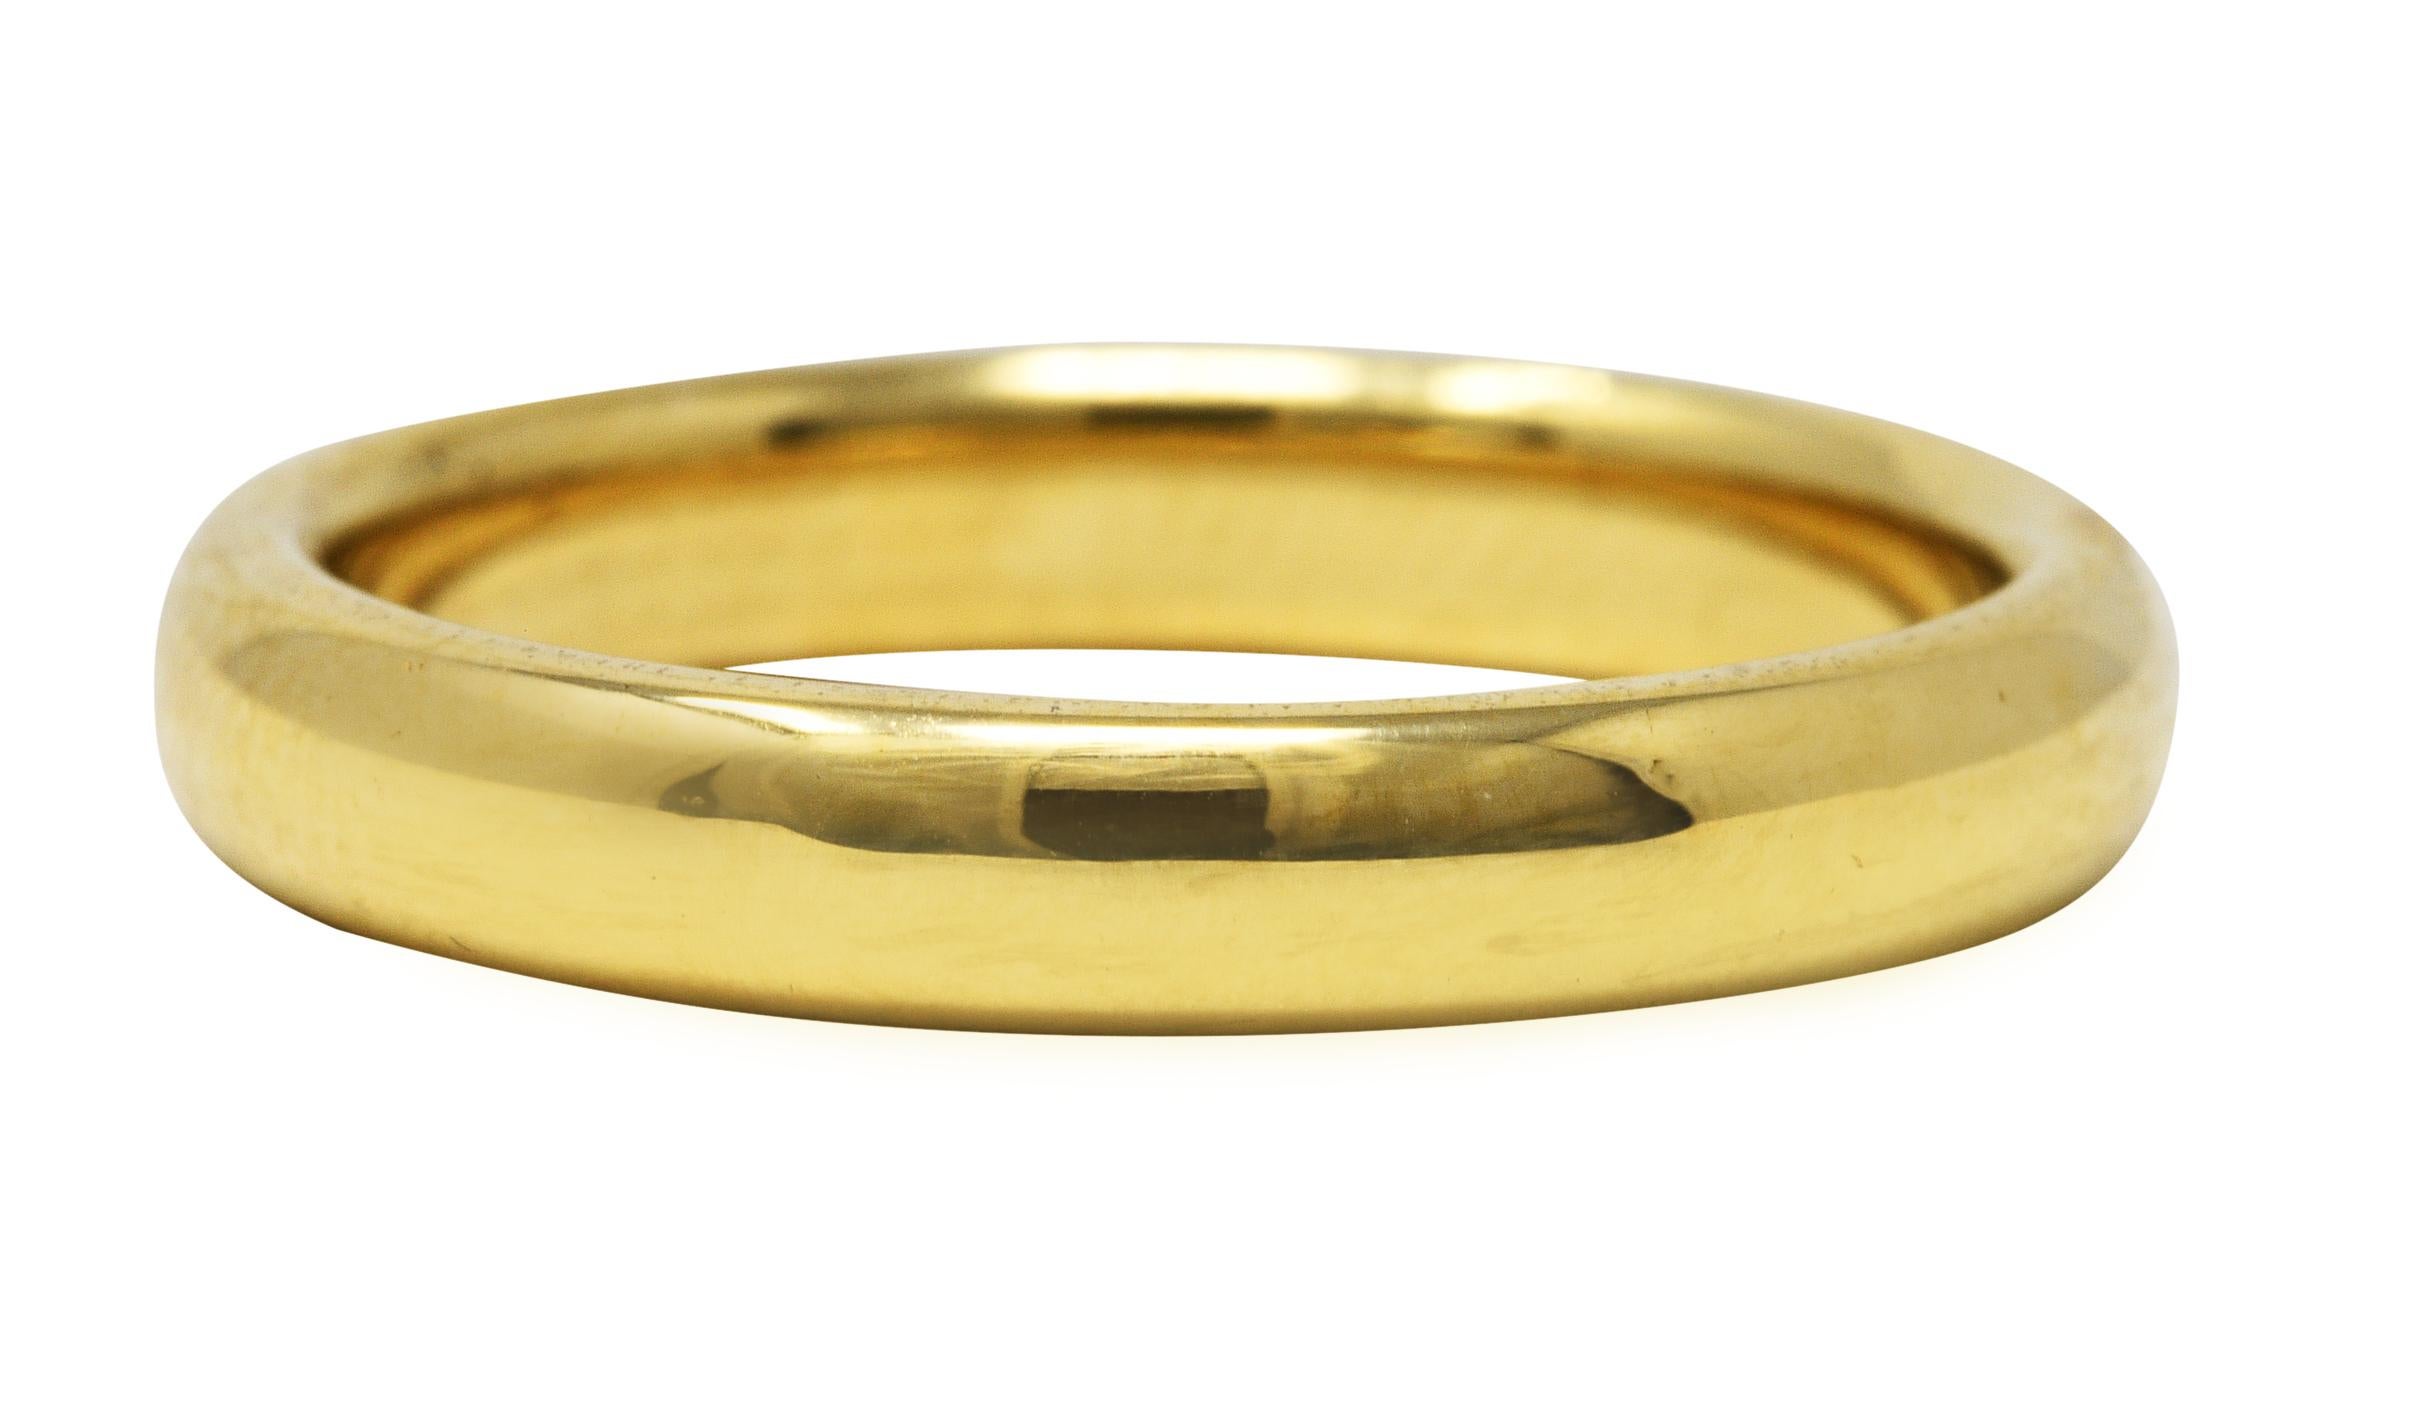 Wide band ring is designed with a rounded curvature

With a brightly polished finish

Stamped 750 for 18 karat gold 

Fully signed Tiffany & Co.

Ring Size: 9 3/4 & sizable

Measures North to South 4.0 mm and sits 2.0 mm high

Total weight: 7.9